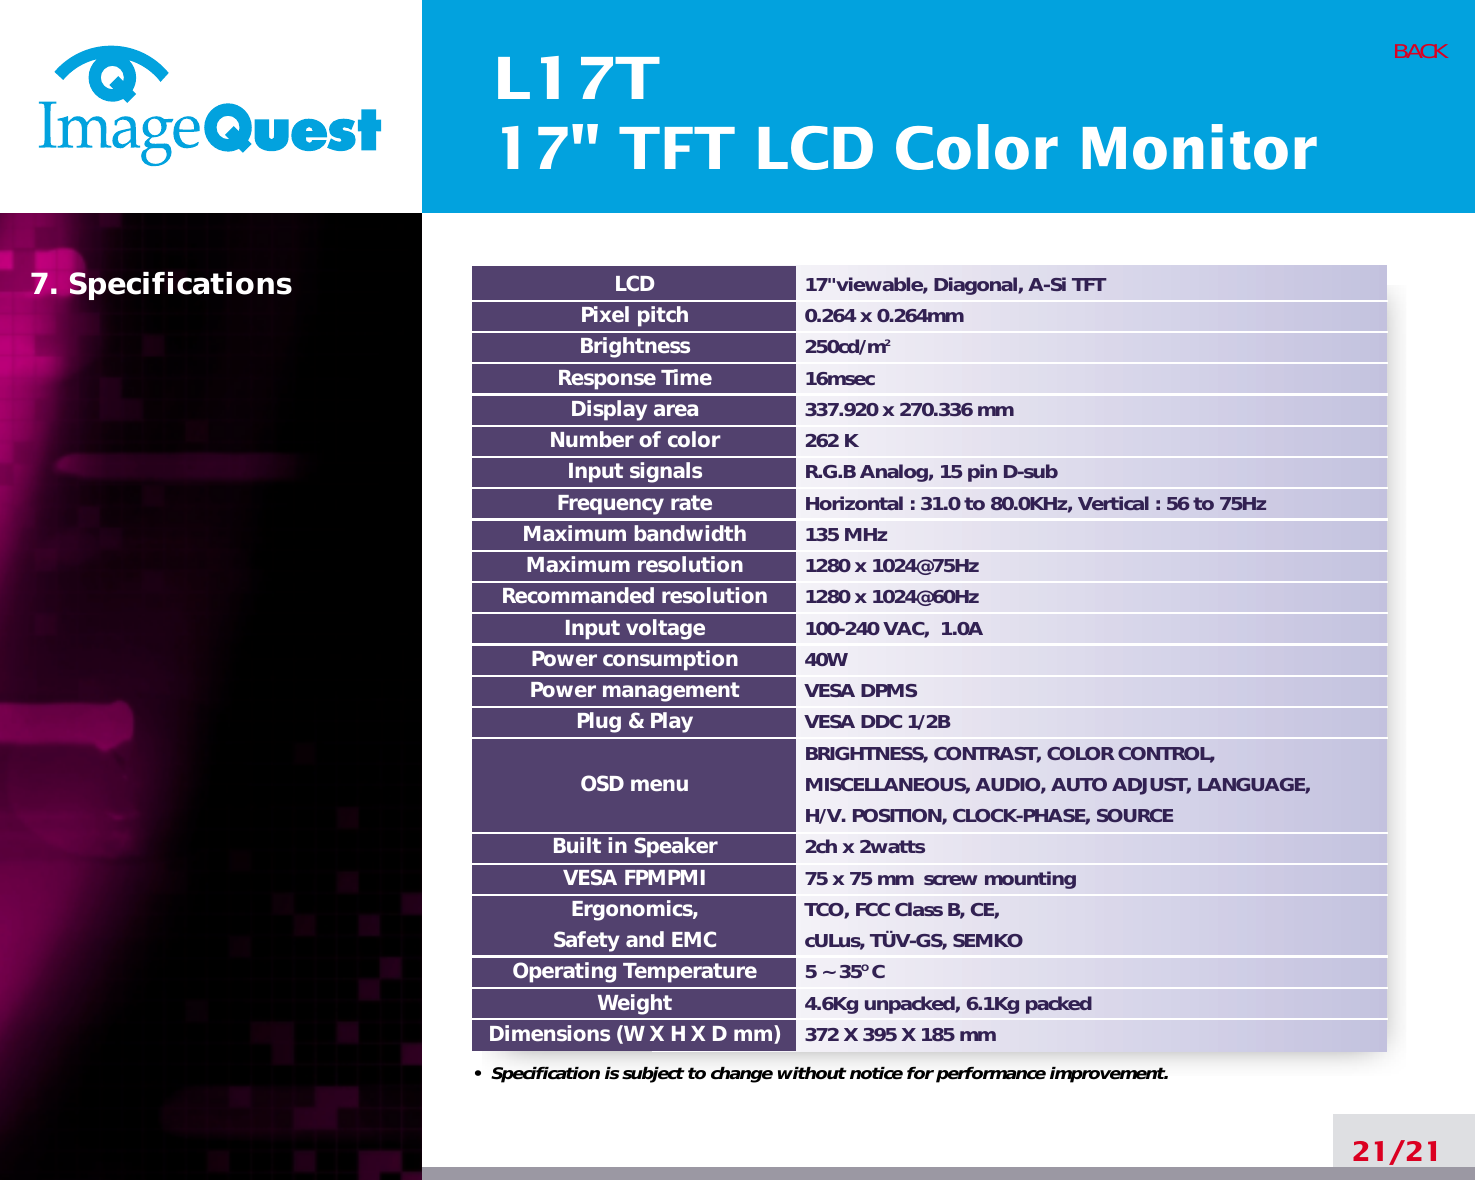 L17T17&quot; TFT LCD Color Monitor21/21BACK17&quot;viewable, Diagonal, A-Si TFT0.264 x 0.264mm250cd/m216msec337.920 x 270.336 mm262 KR.G.B Analog, 15 pin D-subHorizontal : 31.0 to 80.0KHz, Vertical : 56 to 75Hz135 MHz1280 x 1024@75Hz 1280 x 1024@60Hz100-240 VAC,  1.0A40WVESA DPMSVESA DDC 1/2BBRIGHTNESS, CONTRAST, COLOR CONTROL,MISCELLANEOUS, AUDIO, AUTO ADJUST, LANGUAGE,H/V. POSITION, CLOCK-PHASE, SOURCE2ch x 2watts75 x 75 mm  screw mountingTCO, FCC Class B, CE, cULus, TÜV-GS, SEMKO5 ~ 35O C4.6Kg unpacked, 6.1Kg packed372 X 395 X 185 mmLCDPixel pitchBrightnessResponse TimeDisplay areaNumber of colorInput signalsFrequency rateMaximum bandwidthMaximum resolutionRecommanded resolutionInput voltagePower consumptionPower managementPlug &amp; PlayOSD menuBuilt in SpeakerVESA FPMPMIErgonomics,Safety and EMCOperating TemperatureWeightDimensions (W X H X D mm)•  Specification is subject to change without notice for performance improvement.7. Specifications